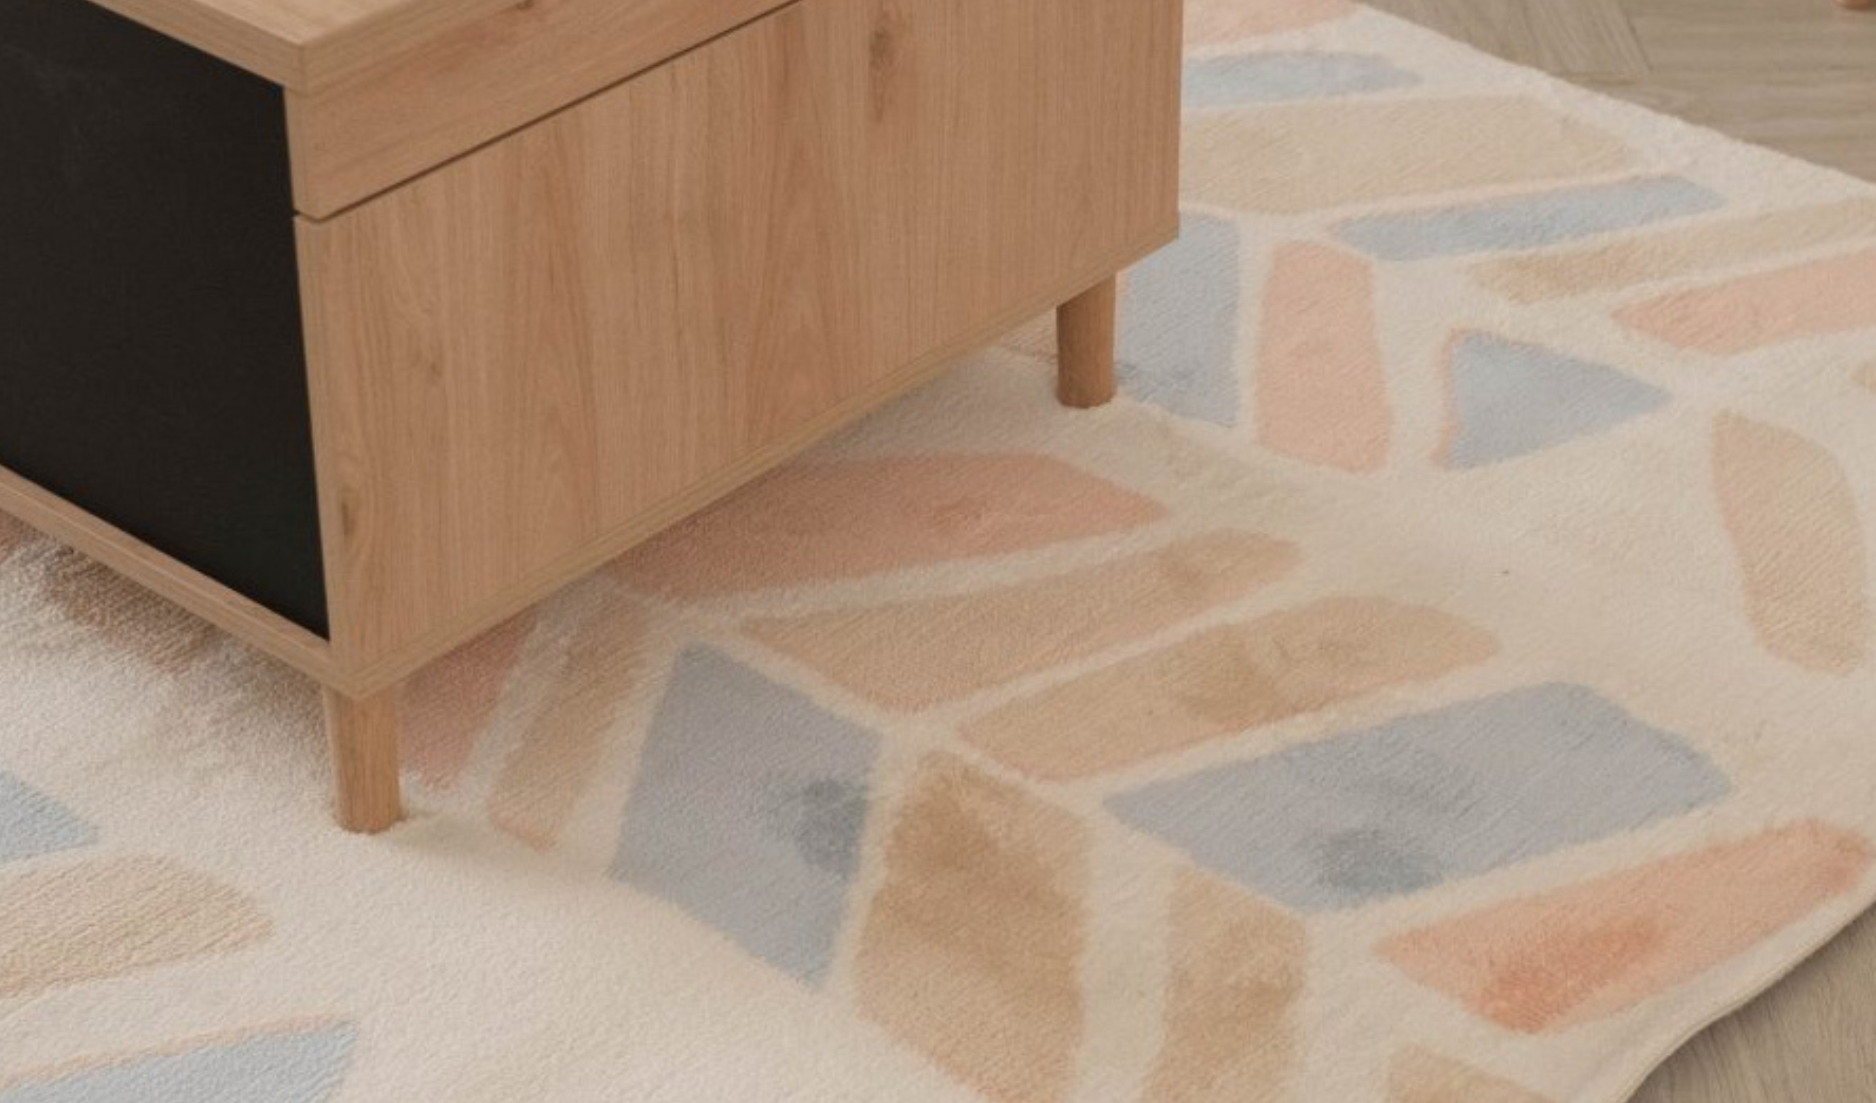 Best Rug Materials To Make Your Home Pet-Friendly